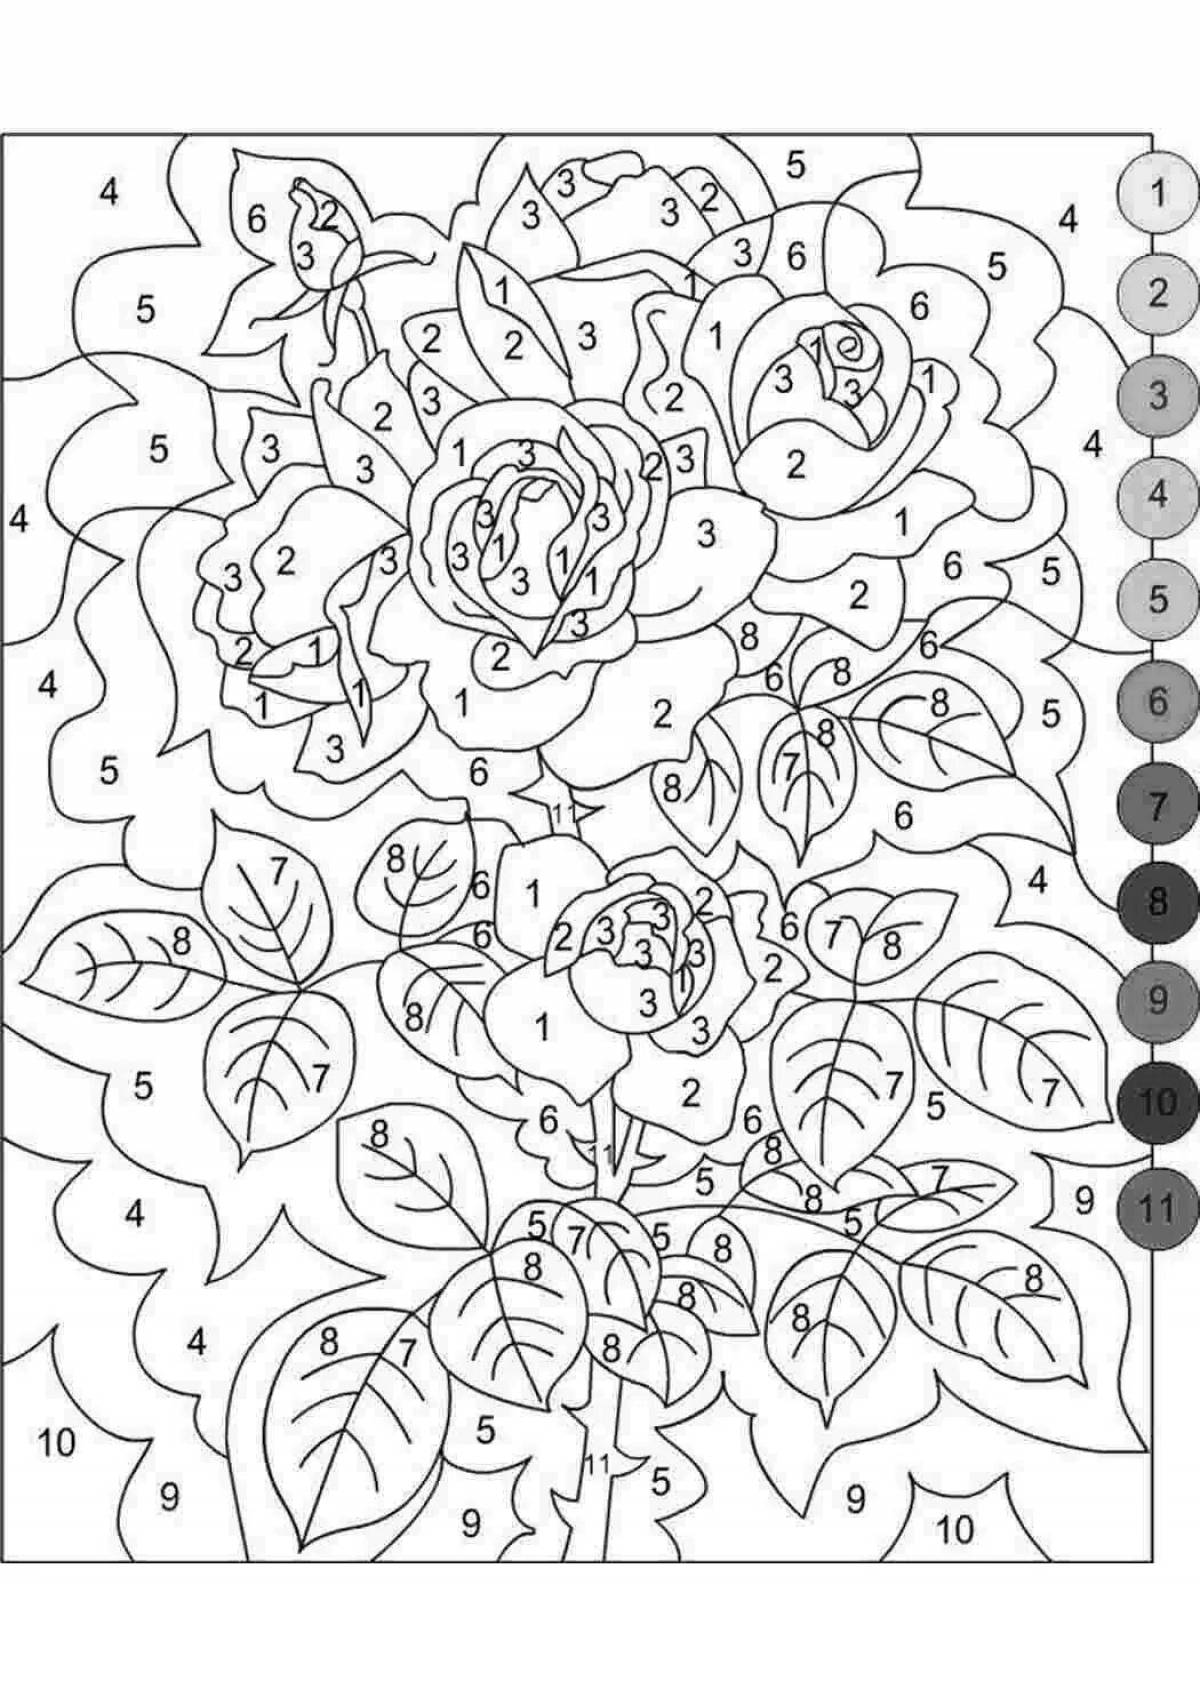 Entertaining coloring by phone numbers